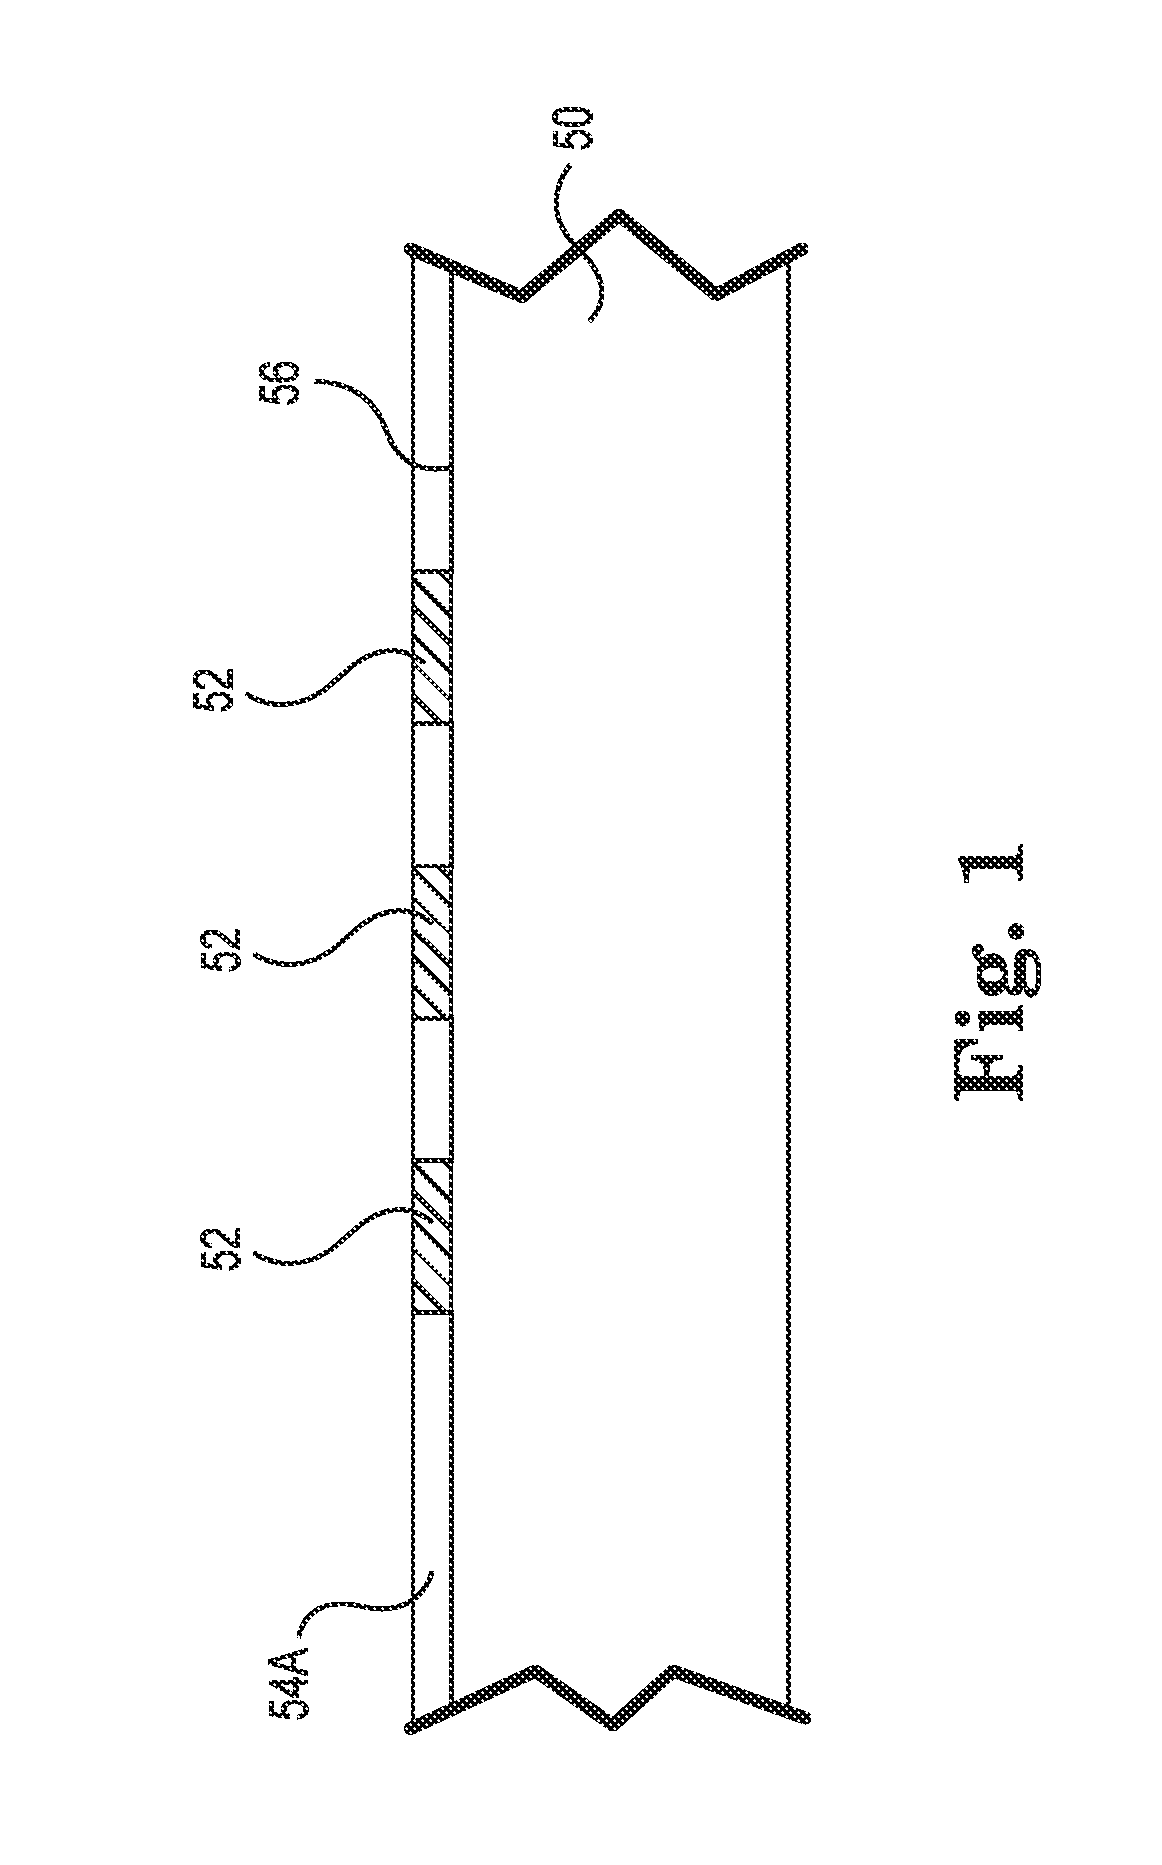 Compliant printed circuit area array semiconductor device package